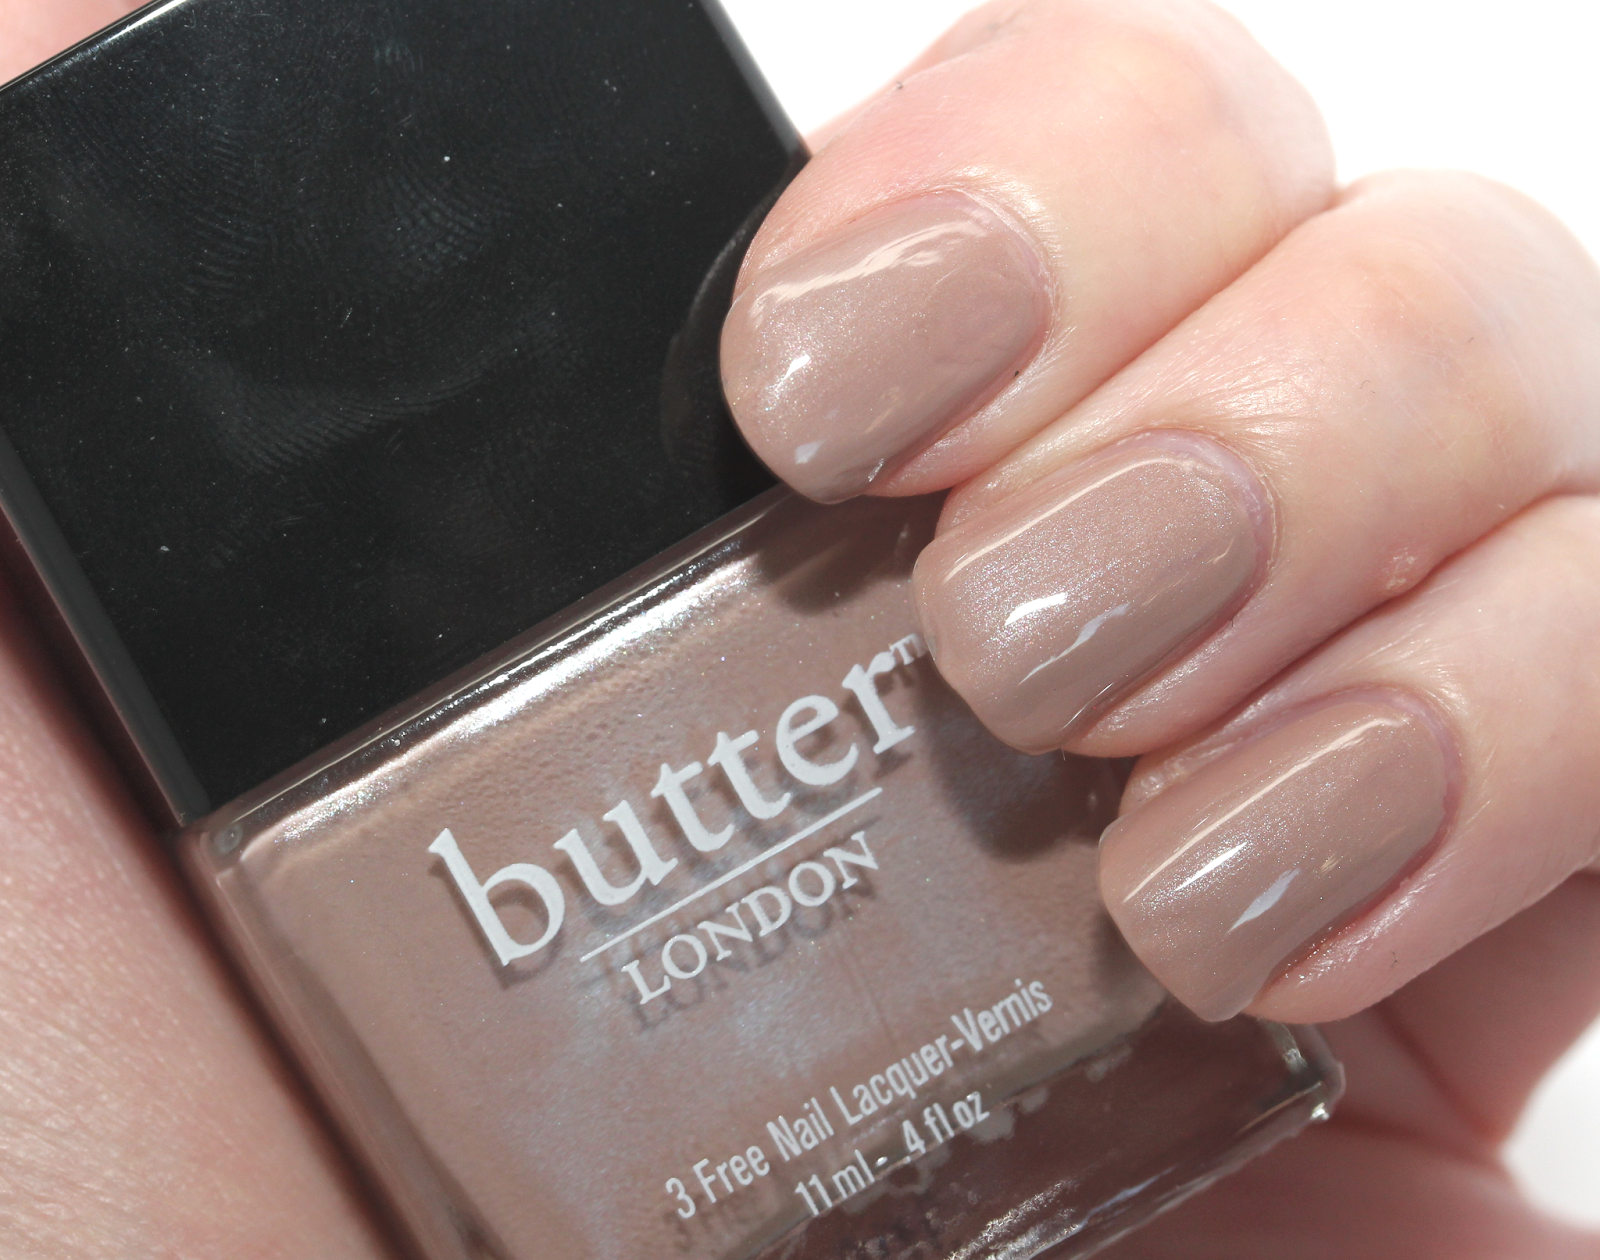 Butter London Nail Lacquer in Teddy Girl - wide 1